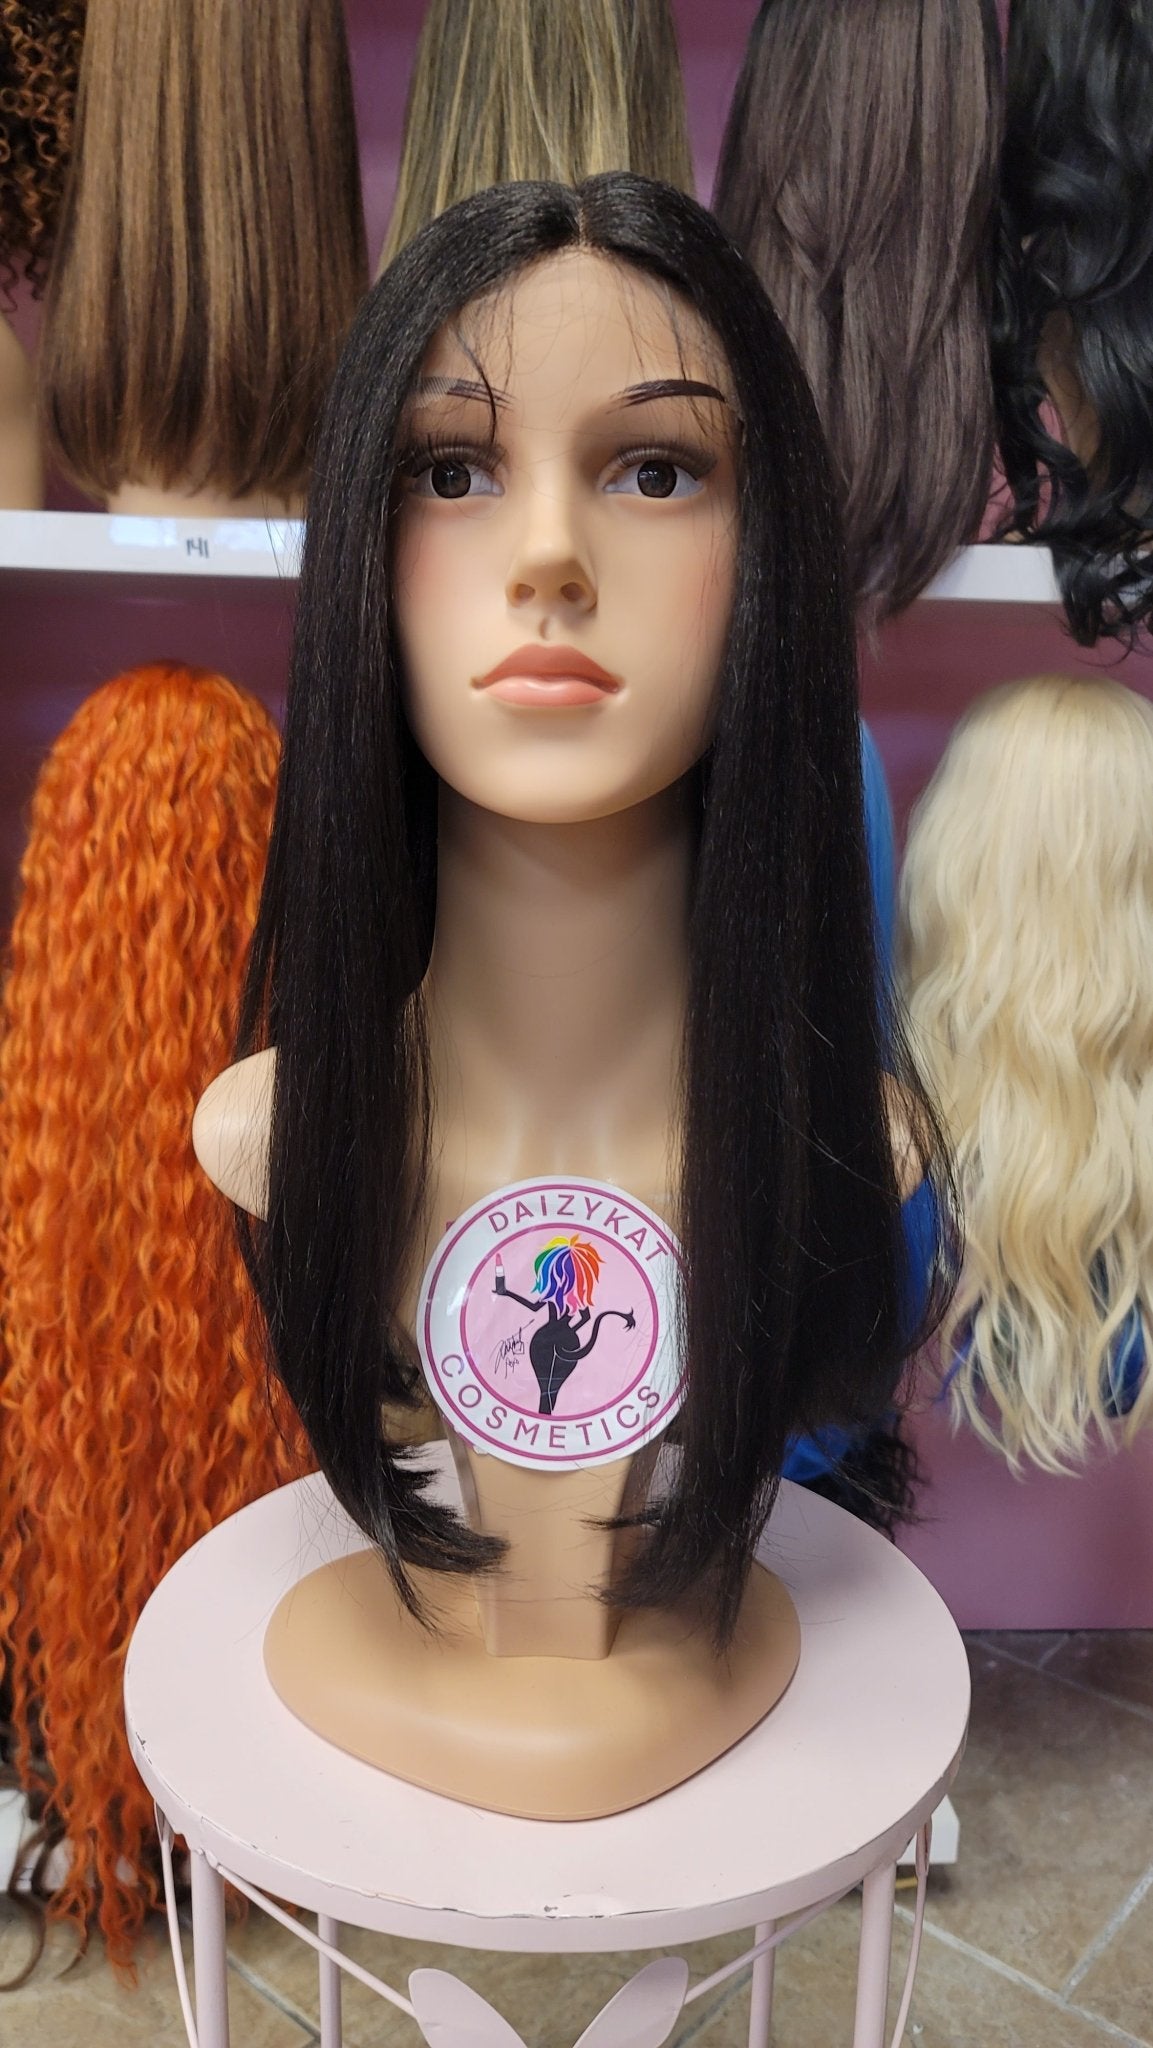 341 Sandra - Middle Part Lace Front Wig Human Hair Blend- 2 - DaizyKat Cosmetics 341 Sandra - Middle Part Lace Front Wig Human Hair Blend- 2 DaizyKat Cosmetics Wigs